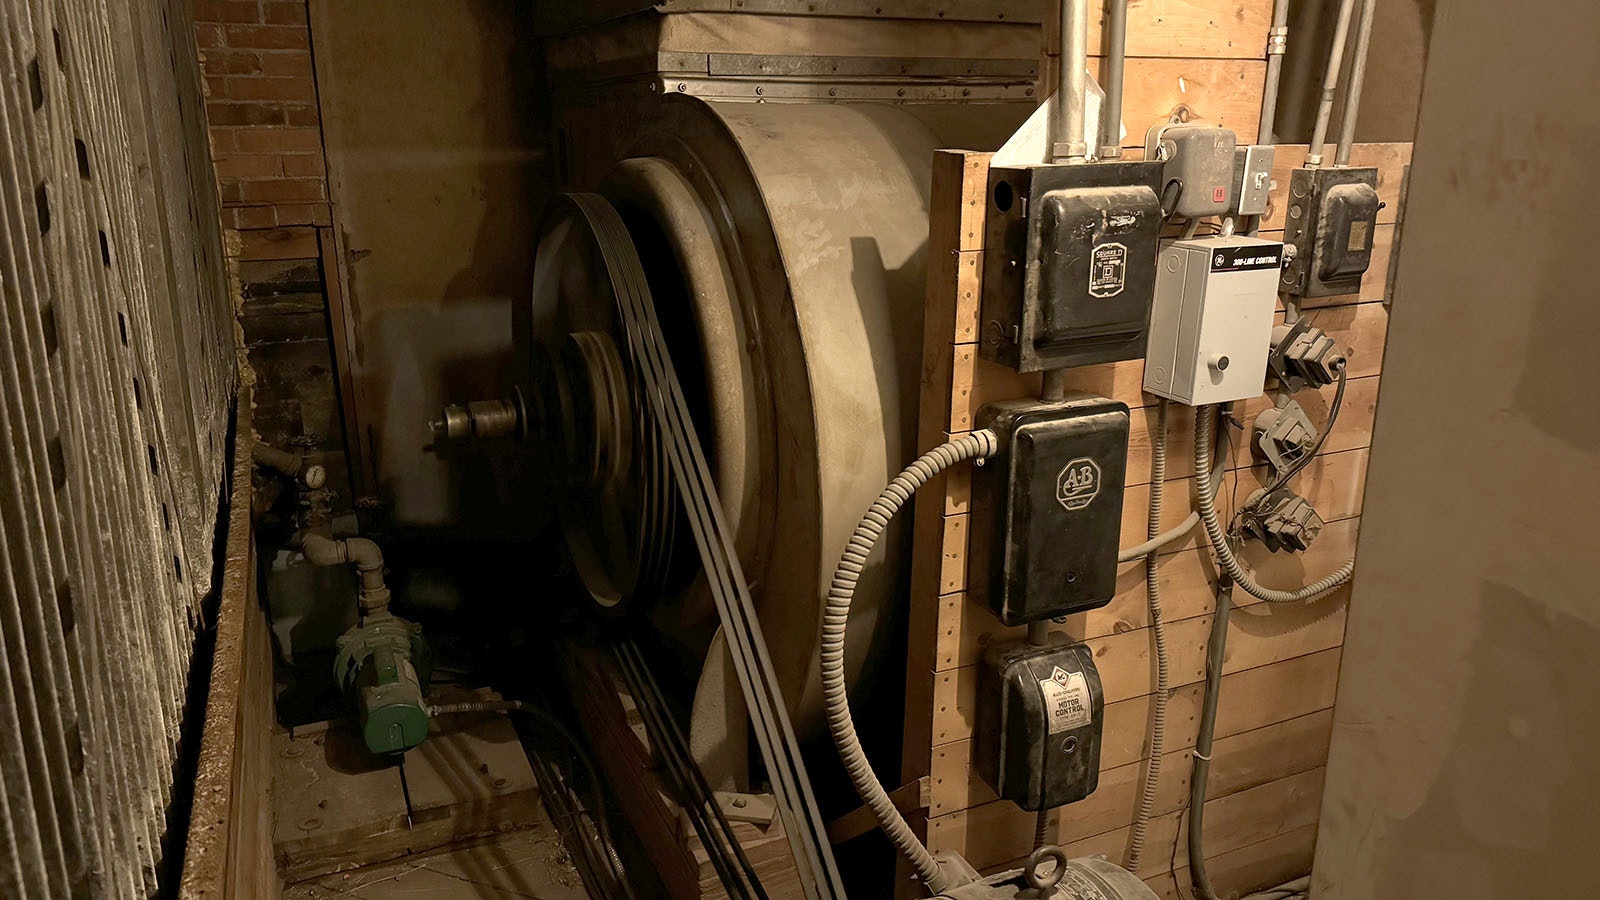 Wyoming's oldest air conditioning unit still works after nearly 90 years.